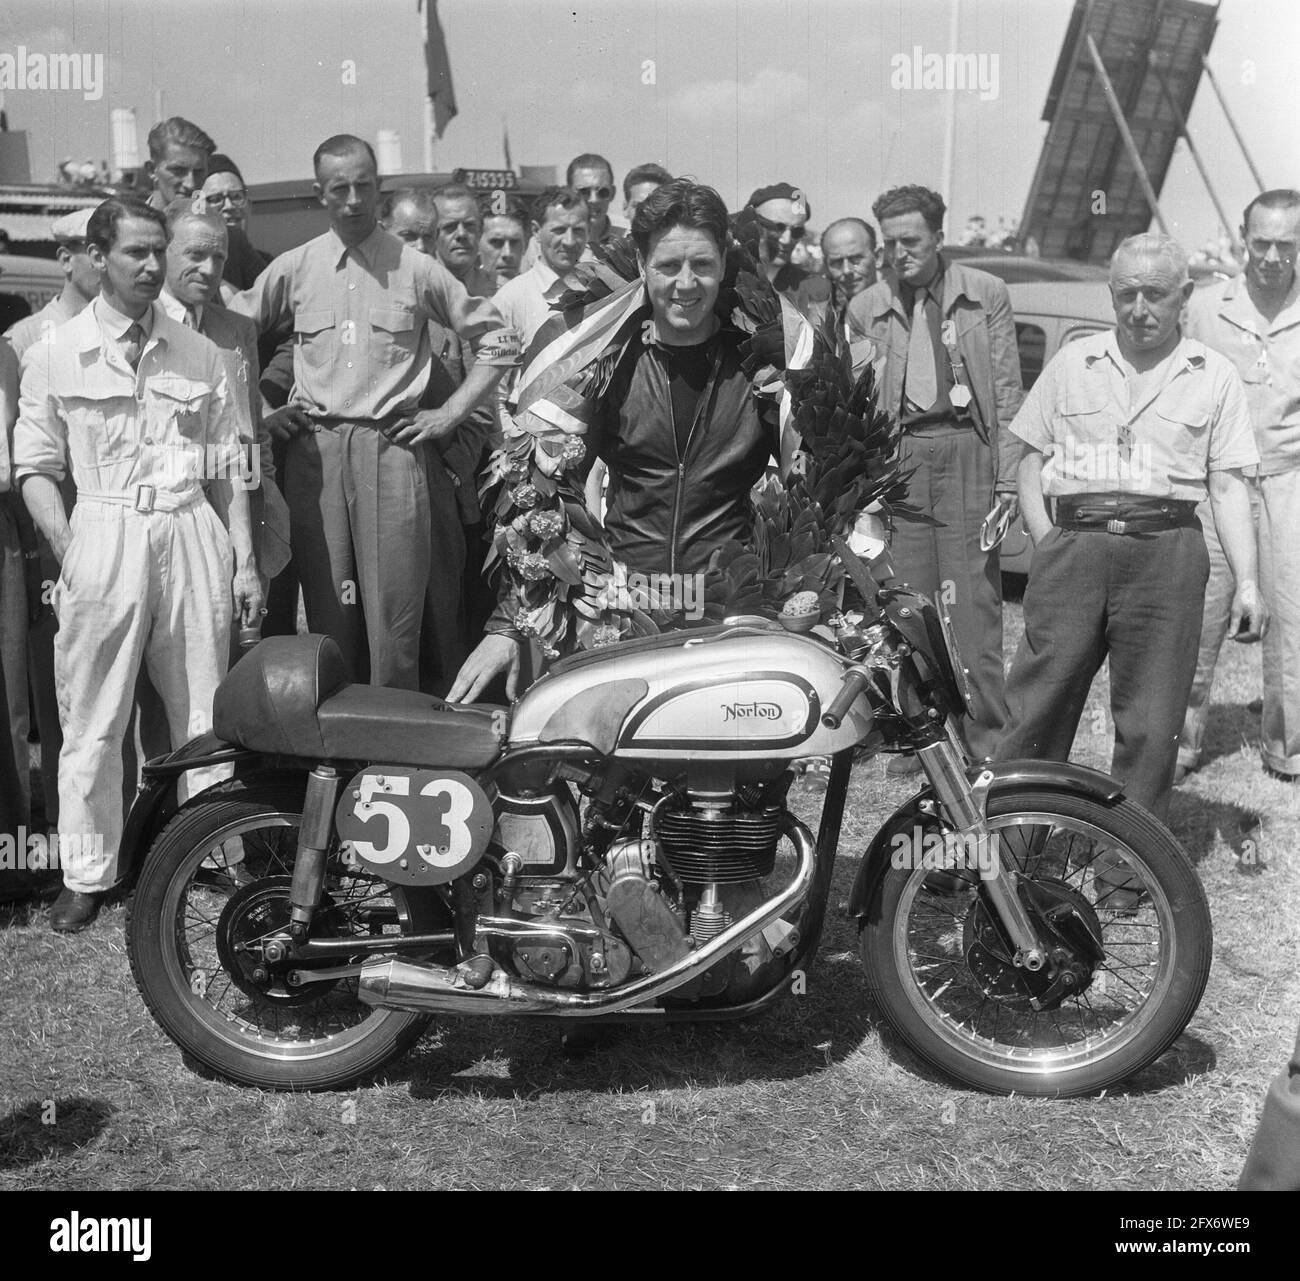 Tribute to Geoff Duke, winner 350cc, June 27, 1952, motorsports, The Netherlands, 20th century press agency photo, news to remember, documentary, historic photography 1945-1990, visual stories, human history of the Twentieth Century, capturing moments in time Stock Photo